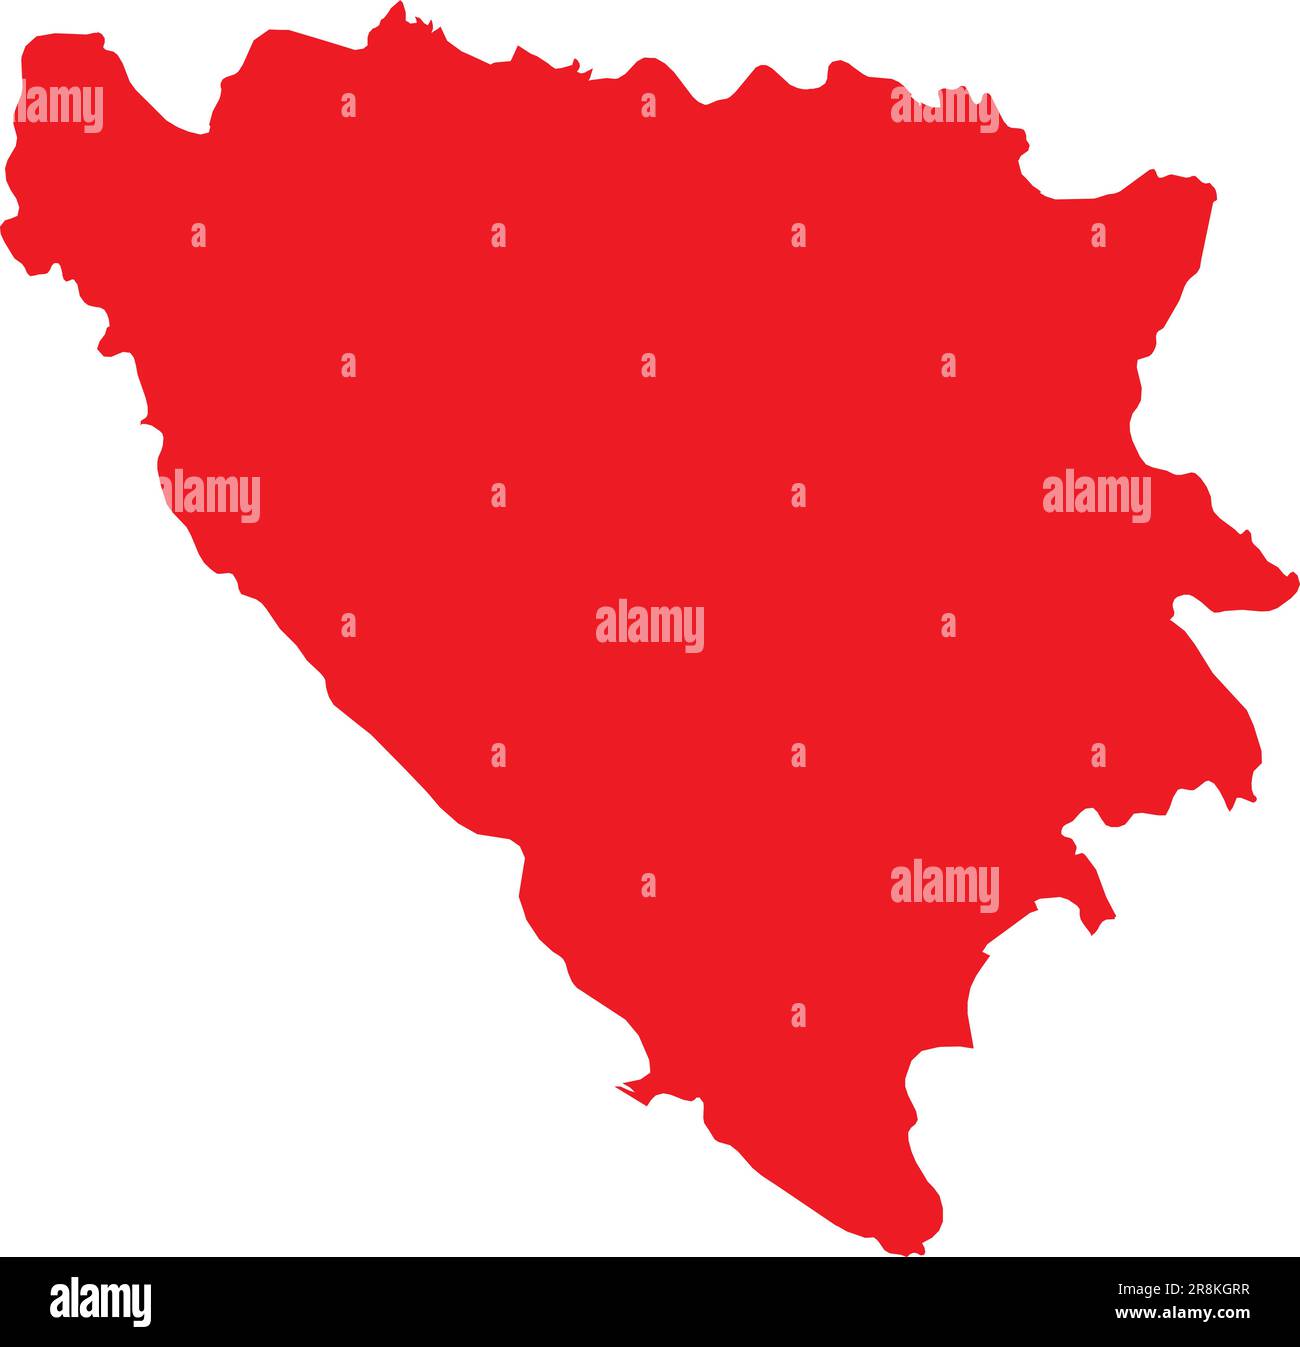 RED CMYK color map of BOSNIA AND HERZEGOVINA Stock Vector